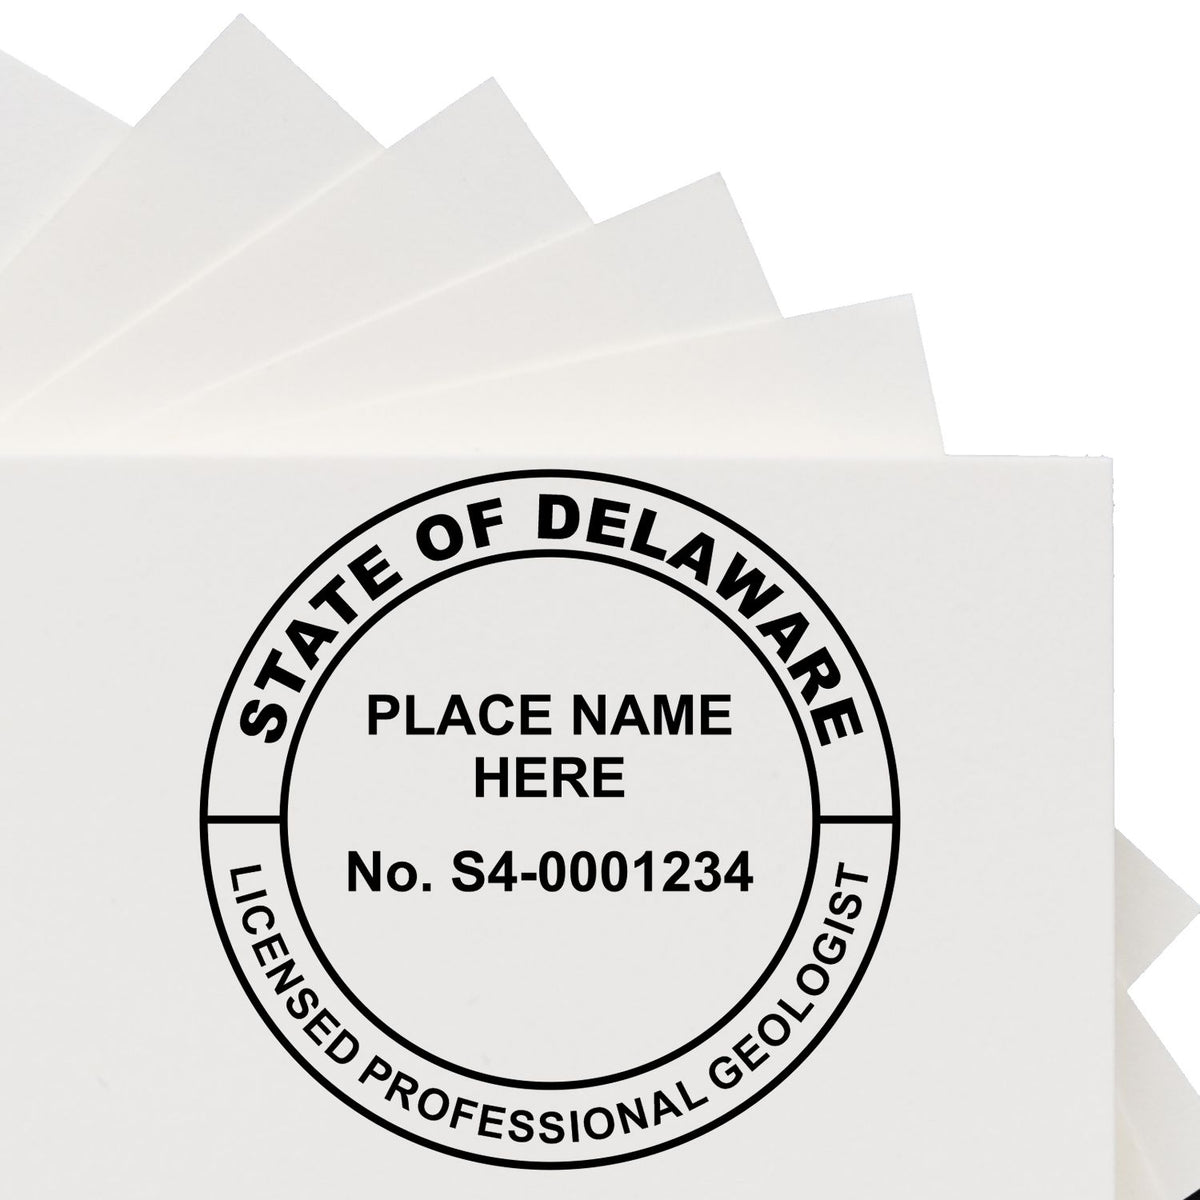 A stamped imprint of the Digital Delaware Geologist Stamp, Electronic Seal for Delaware Geologist in this stylish lifestyle photo, setting the tone for a unique and personalized product.